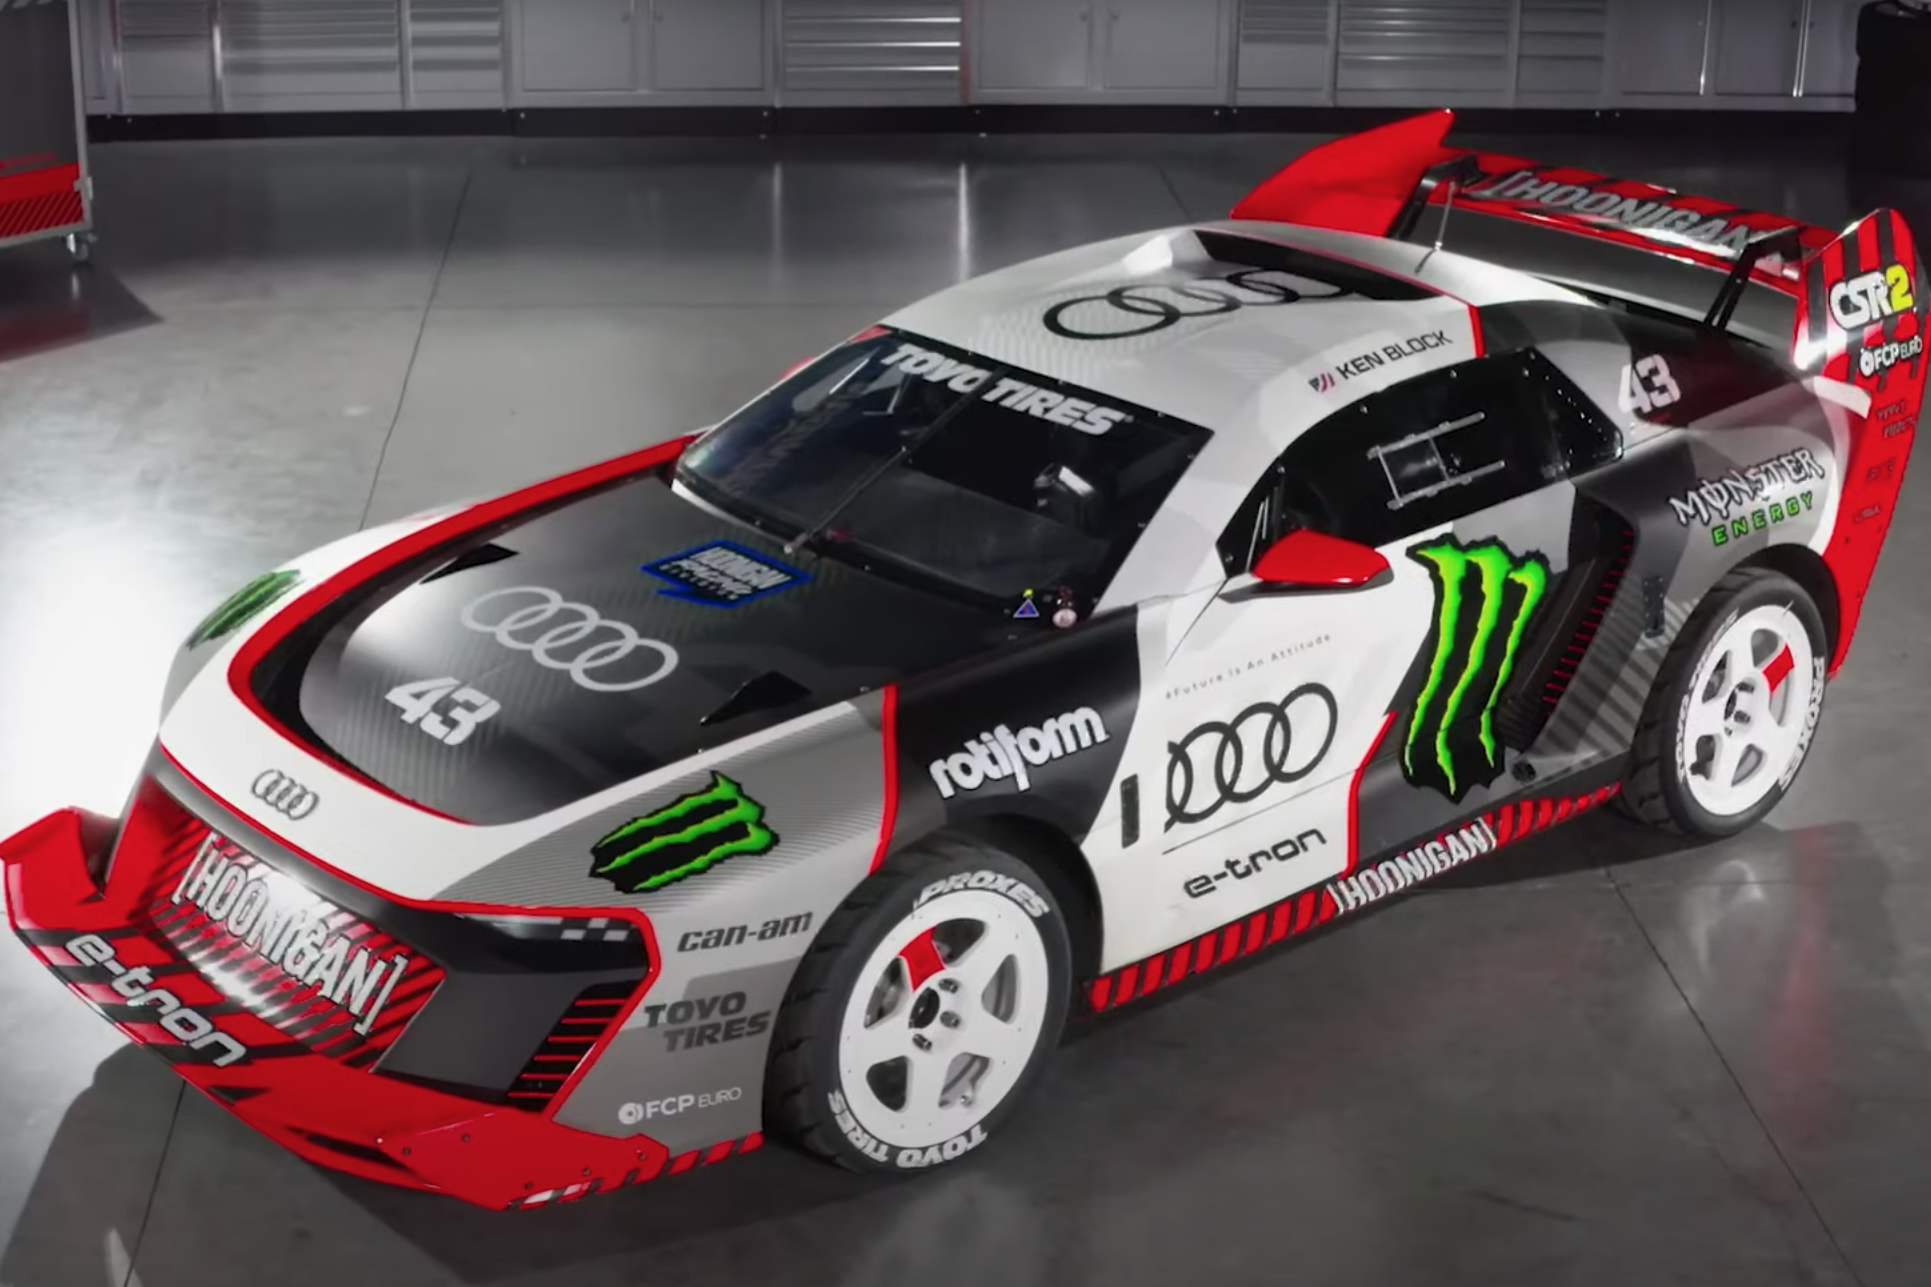 Audi S1 Hoonitron: A Race Car From Audi Like Never Before - e-tron connect